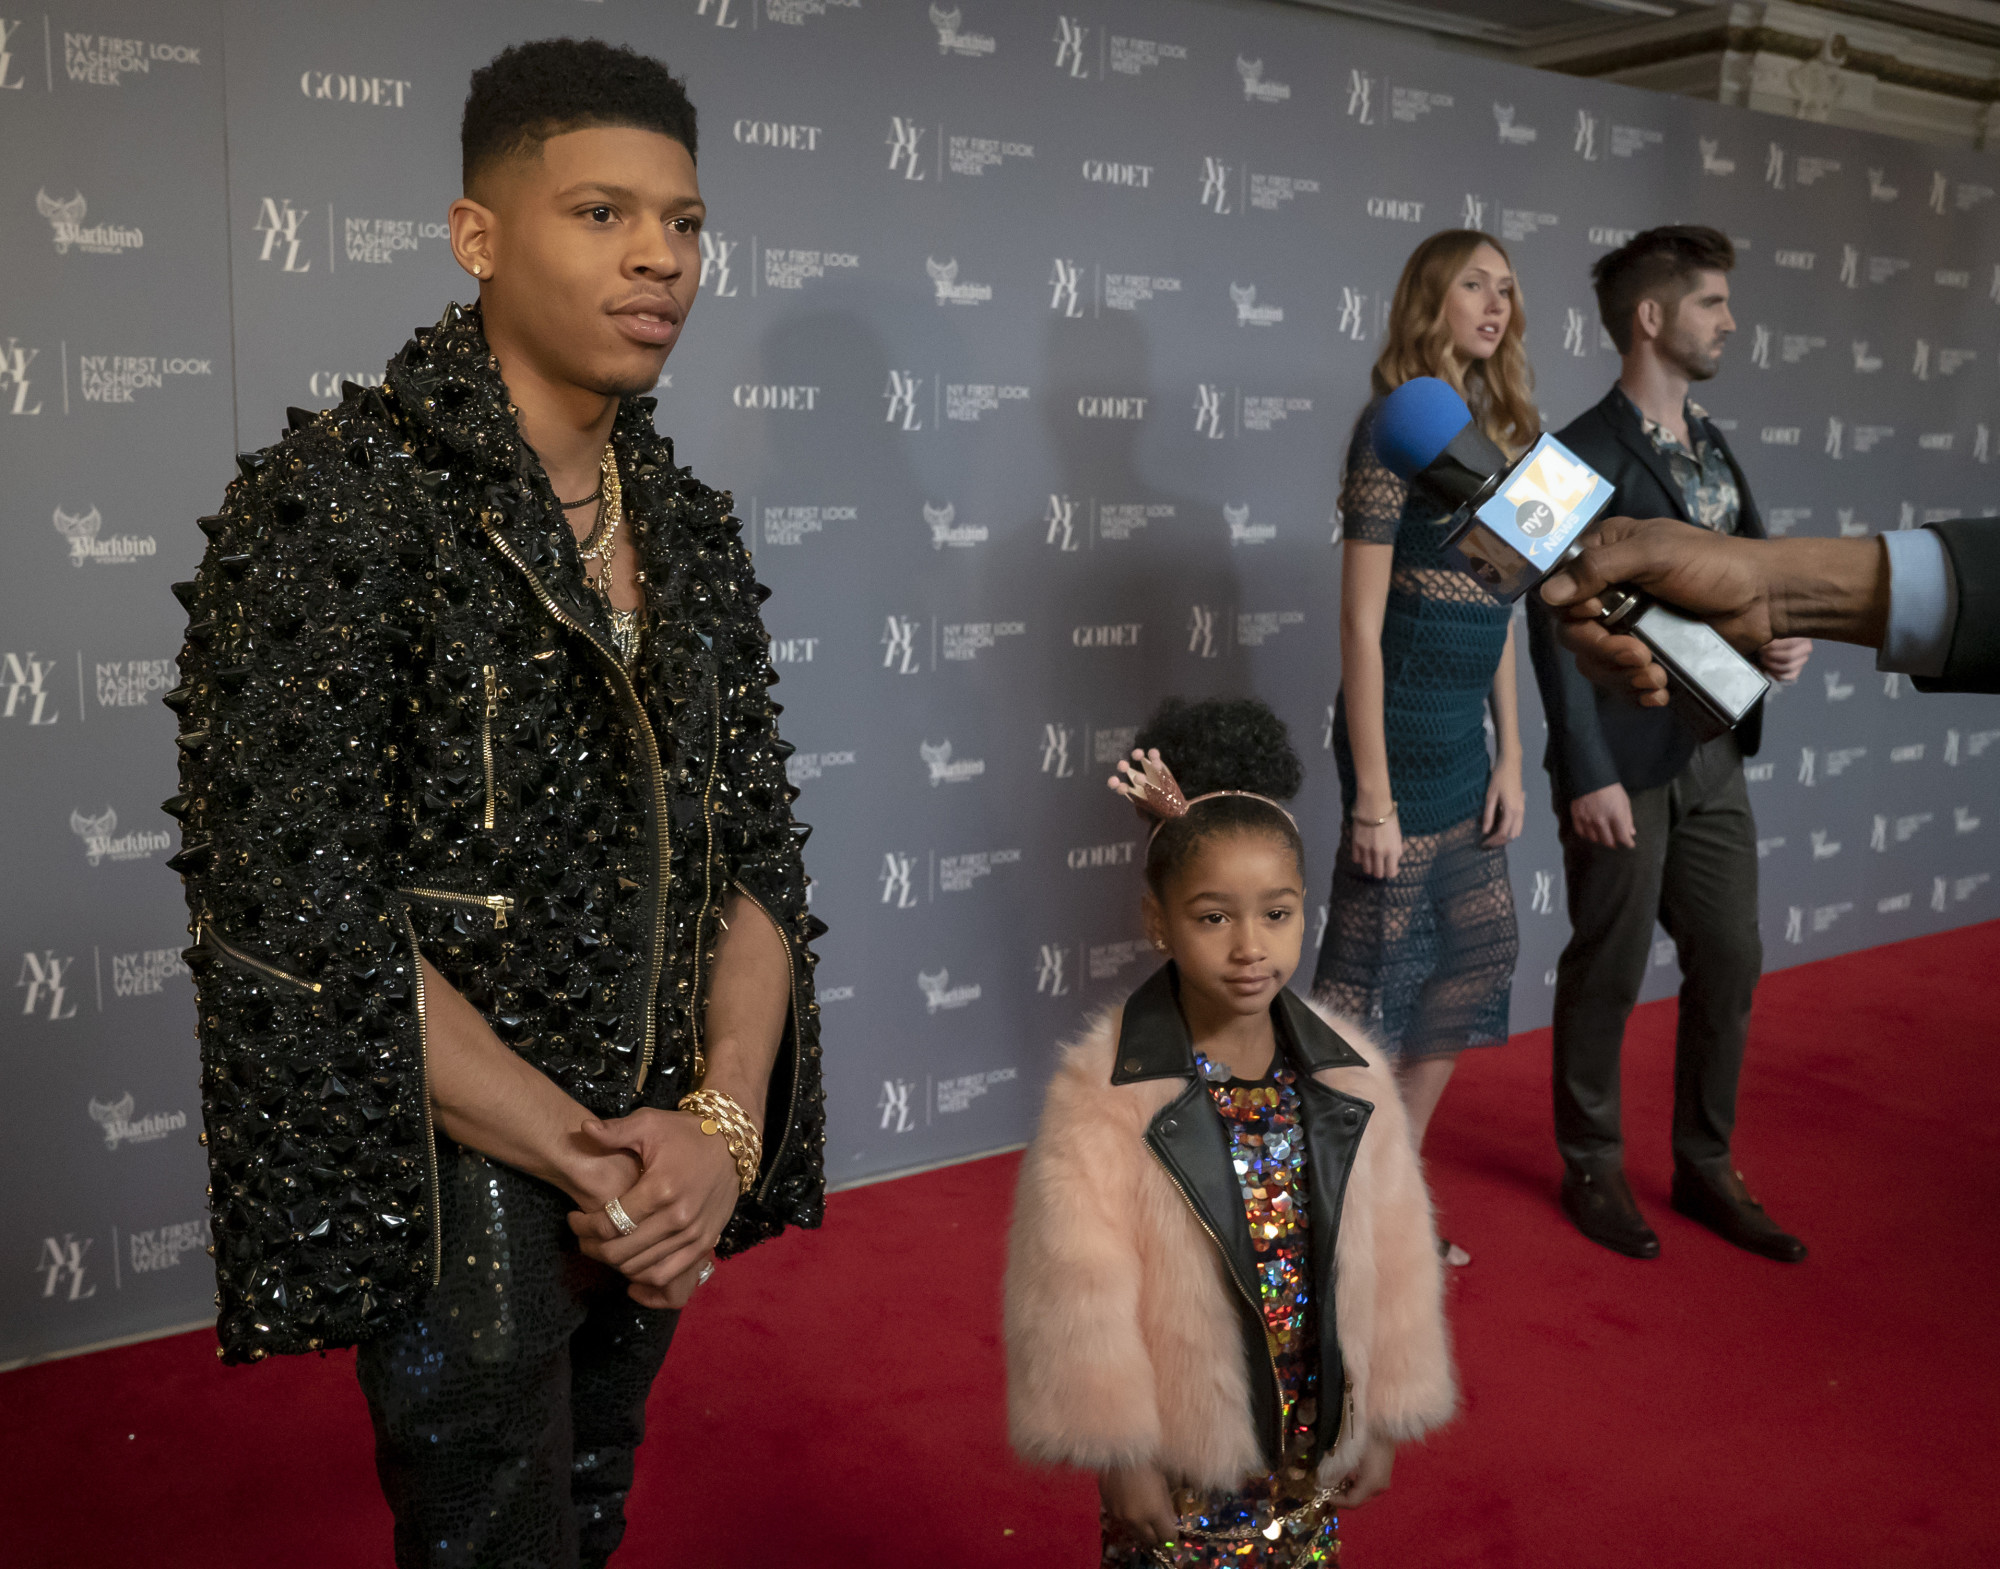 EMPIRE: L-R: Bryshere Y. Gray and Bella Chanel in the "In Loving Virtue" episode of EMPIRE airing Wednesday, March 20 (8:00-9:00 PM ET/PT) on FOX. @2019 Fox Broadcasting Co. CR: Chuck Hodes/FOX.